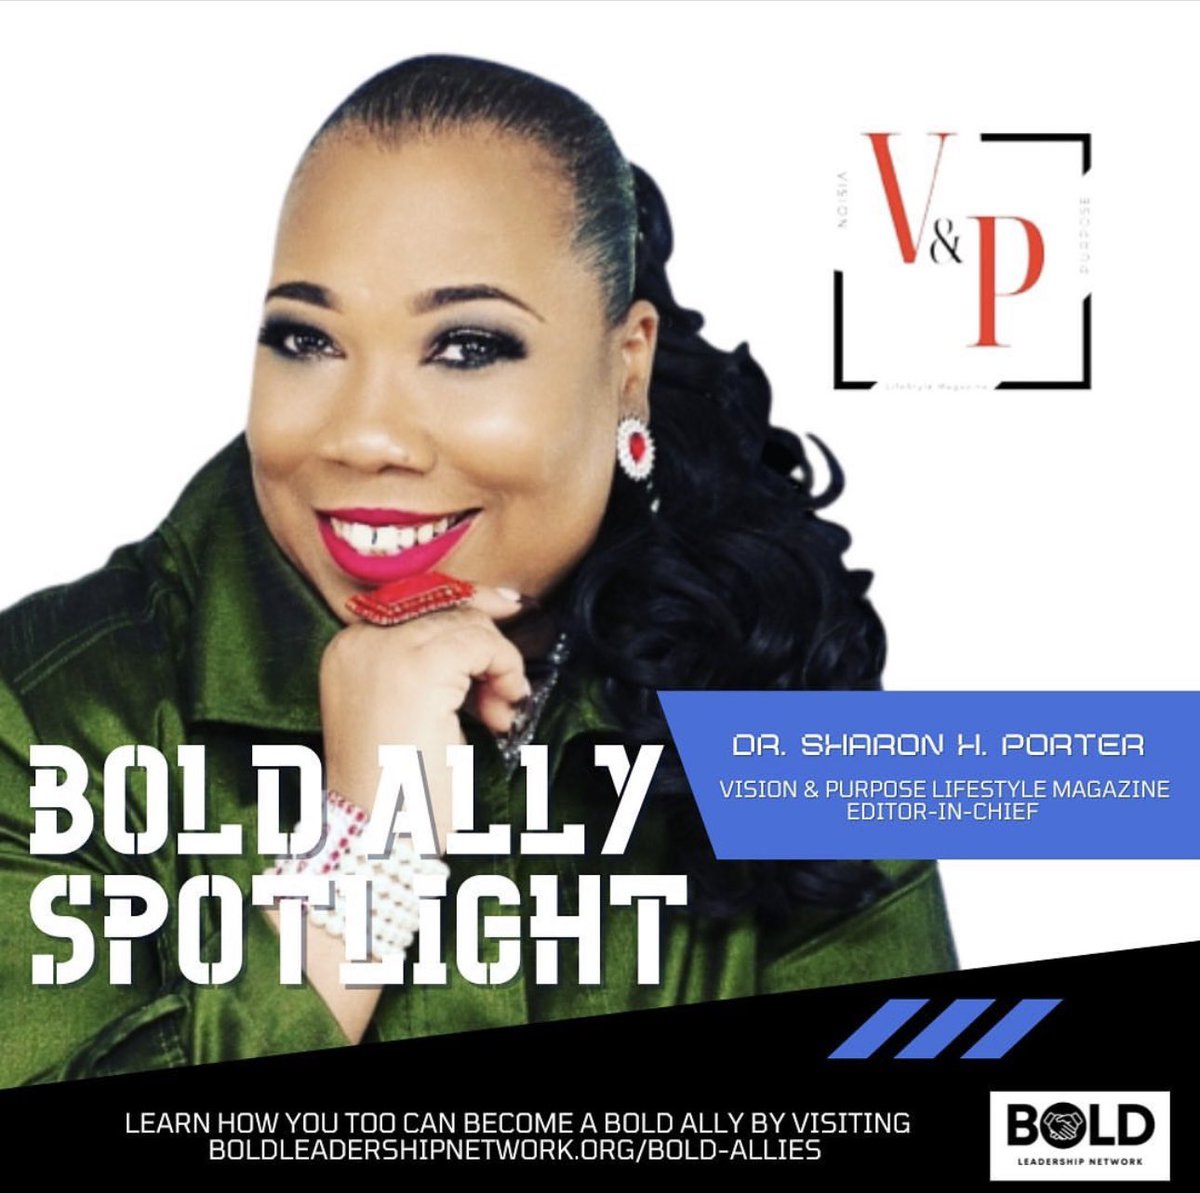 Commit to a BOLD Future by Becoming a BOLD Ally BOLD Ally Spotlight: @sharonhporter @DrSharonHPorter Learn how you too can become a BOLD Ally by visiting boldleadershipnetwork.org/bold-allies. #BOLDIsAChoice #NAESP23 #BOLDAllies #leadership #diversity #equity #inclusion #education #BIPOC